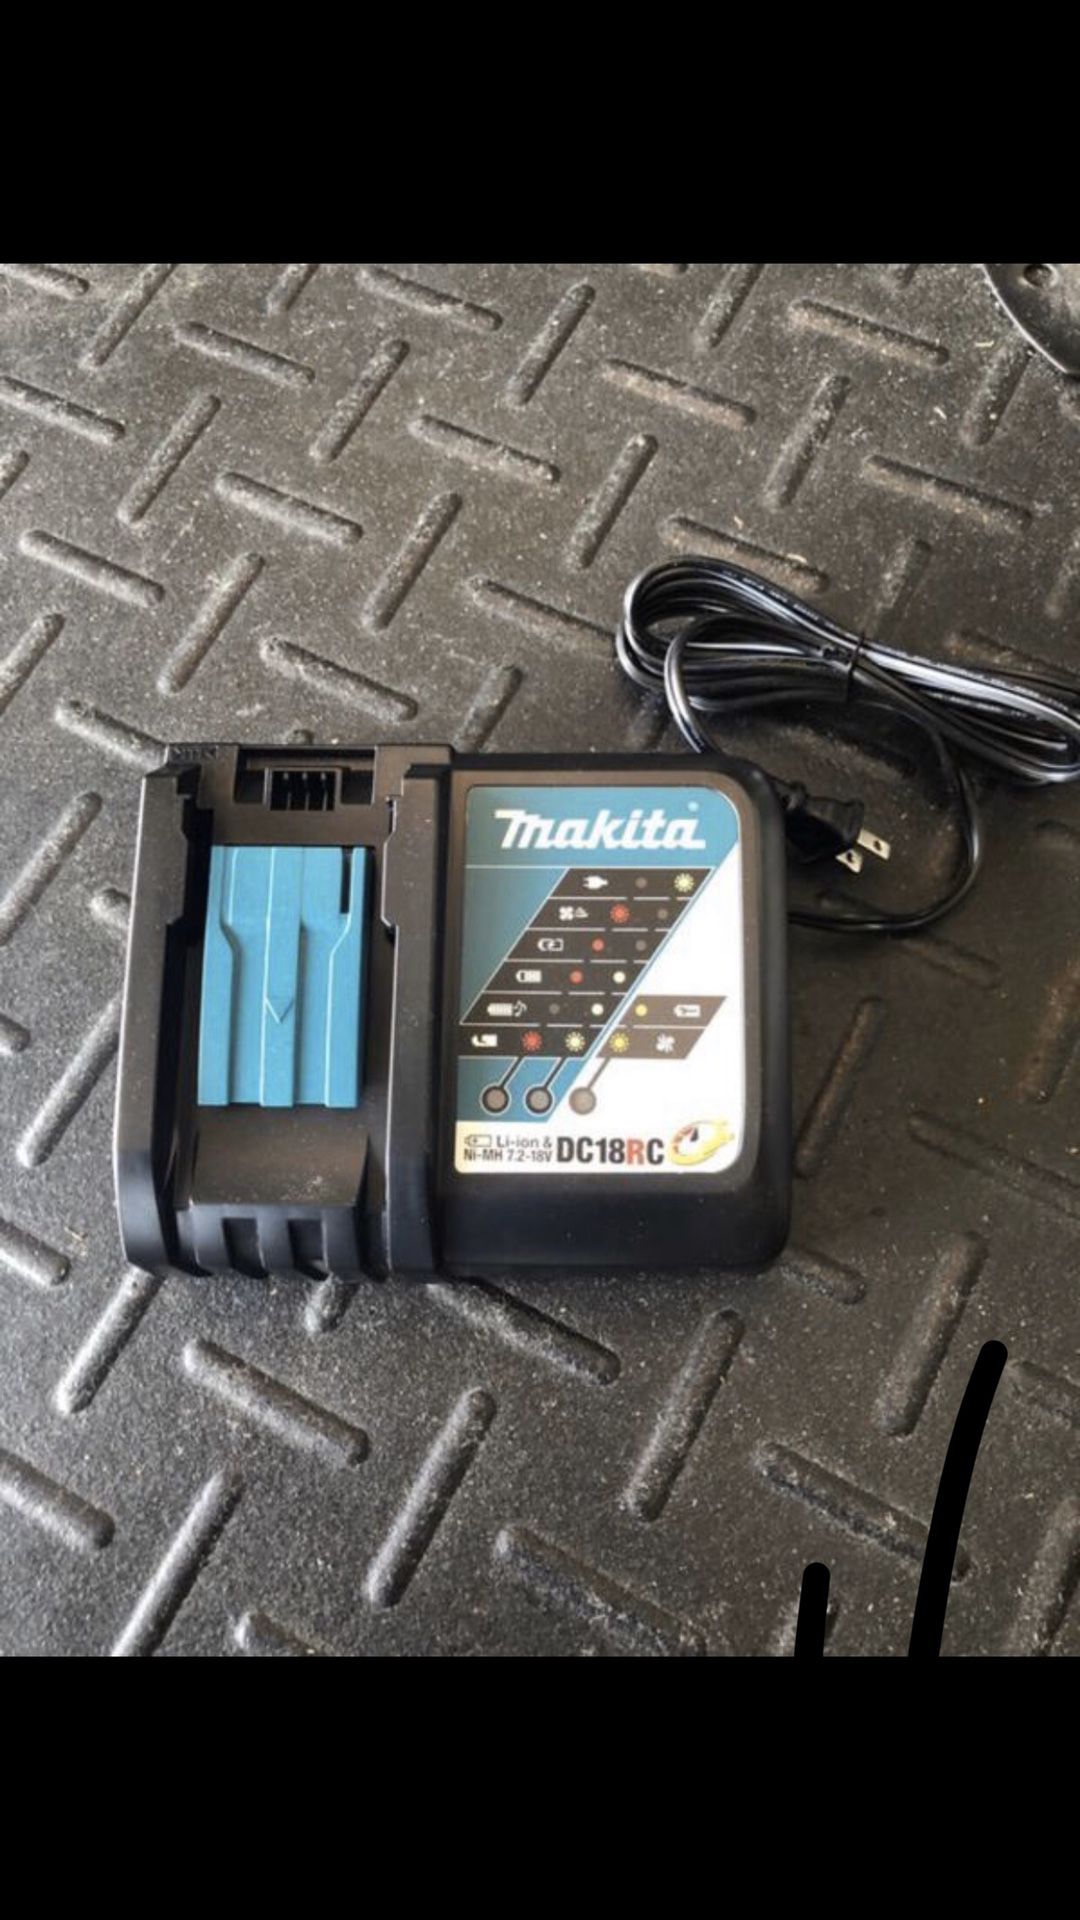 New Makita battery charger never used